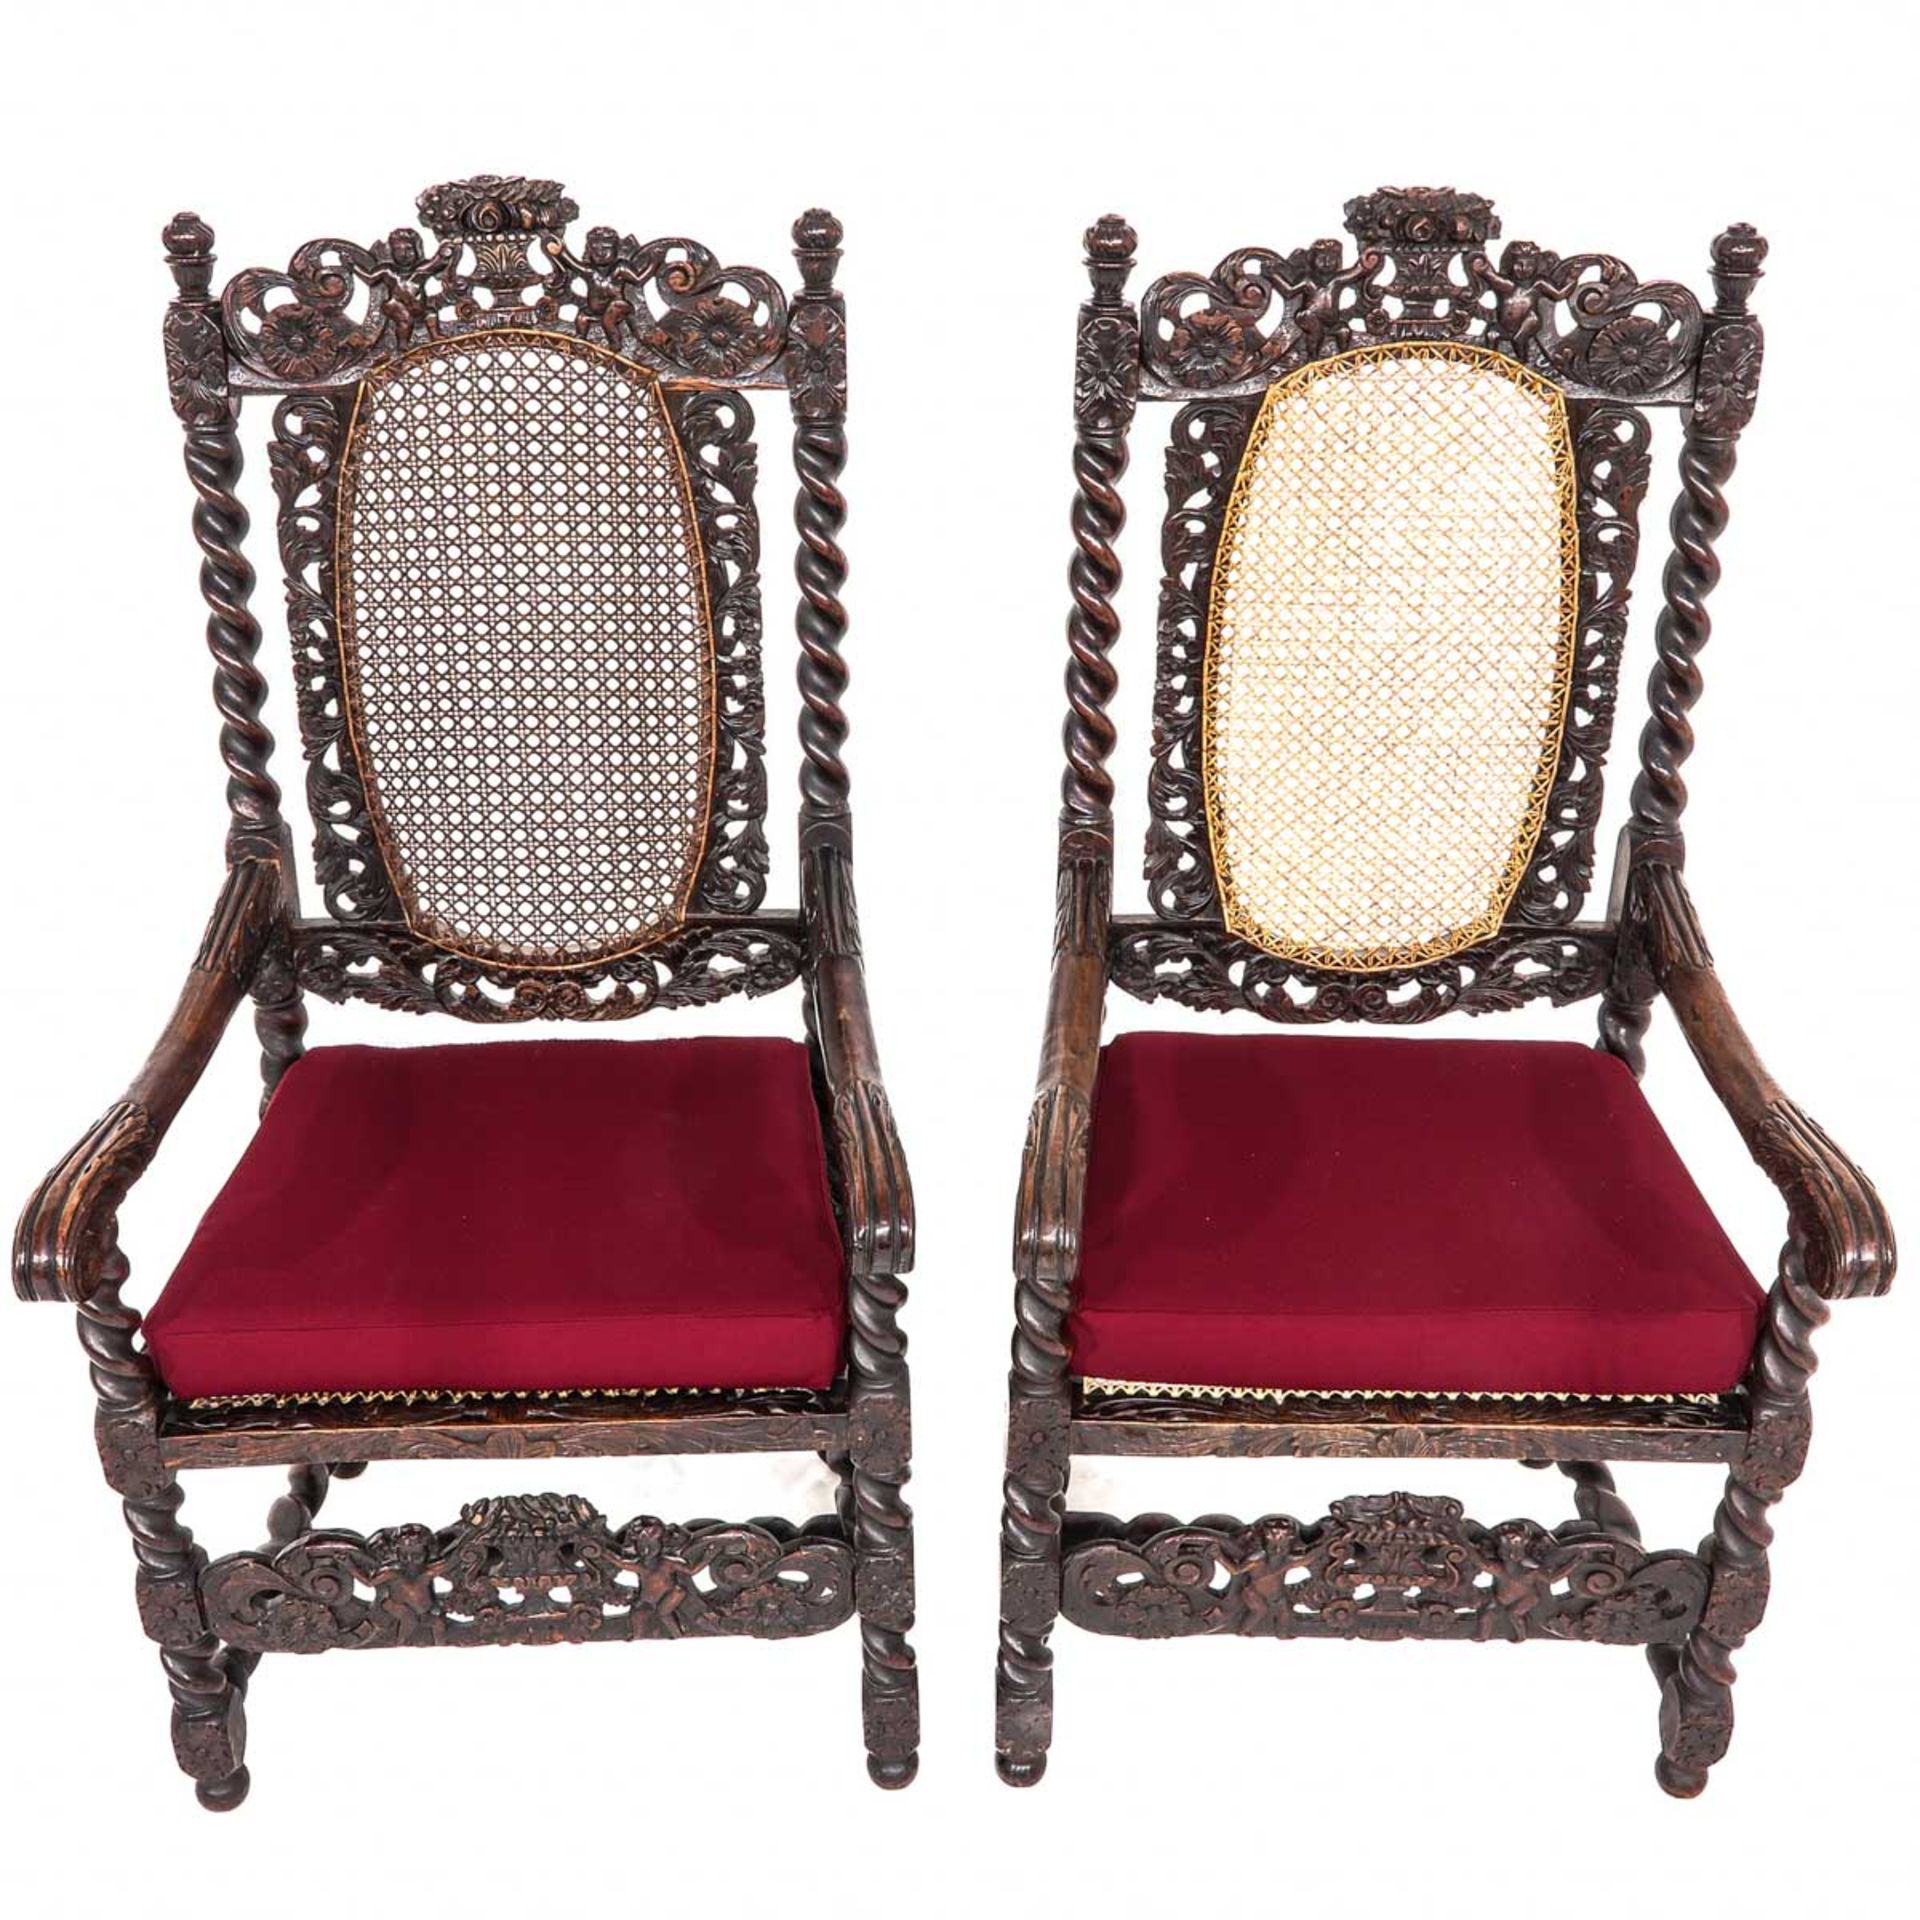 A Pair of William and Mary Chairs - Image 5 of 10